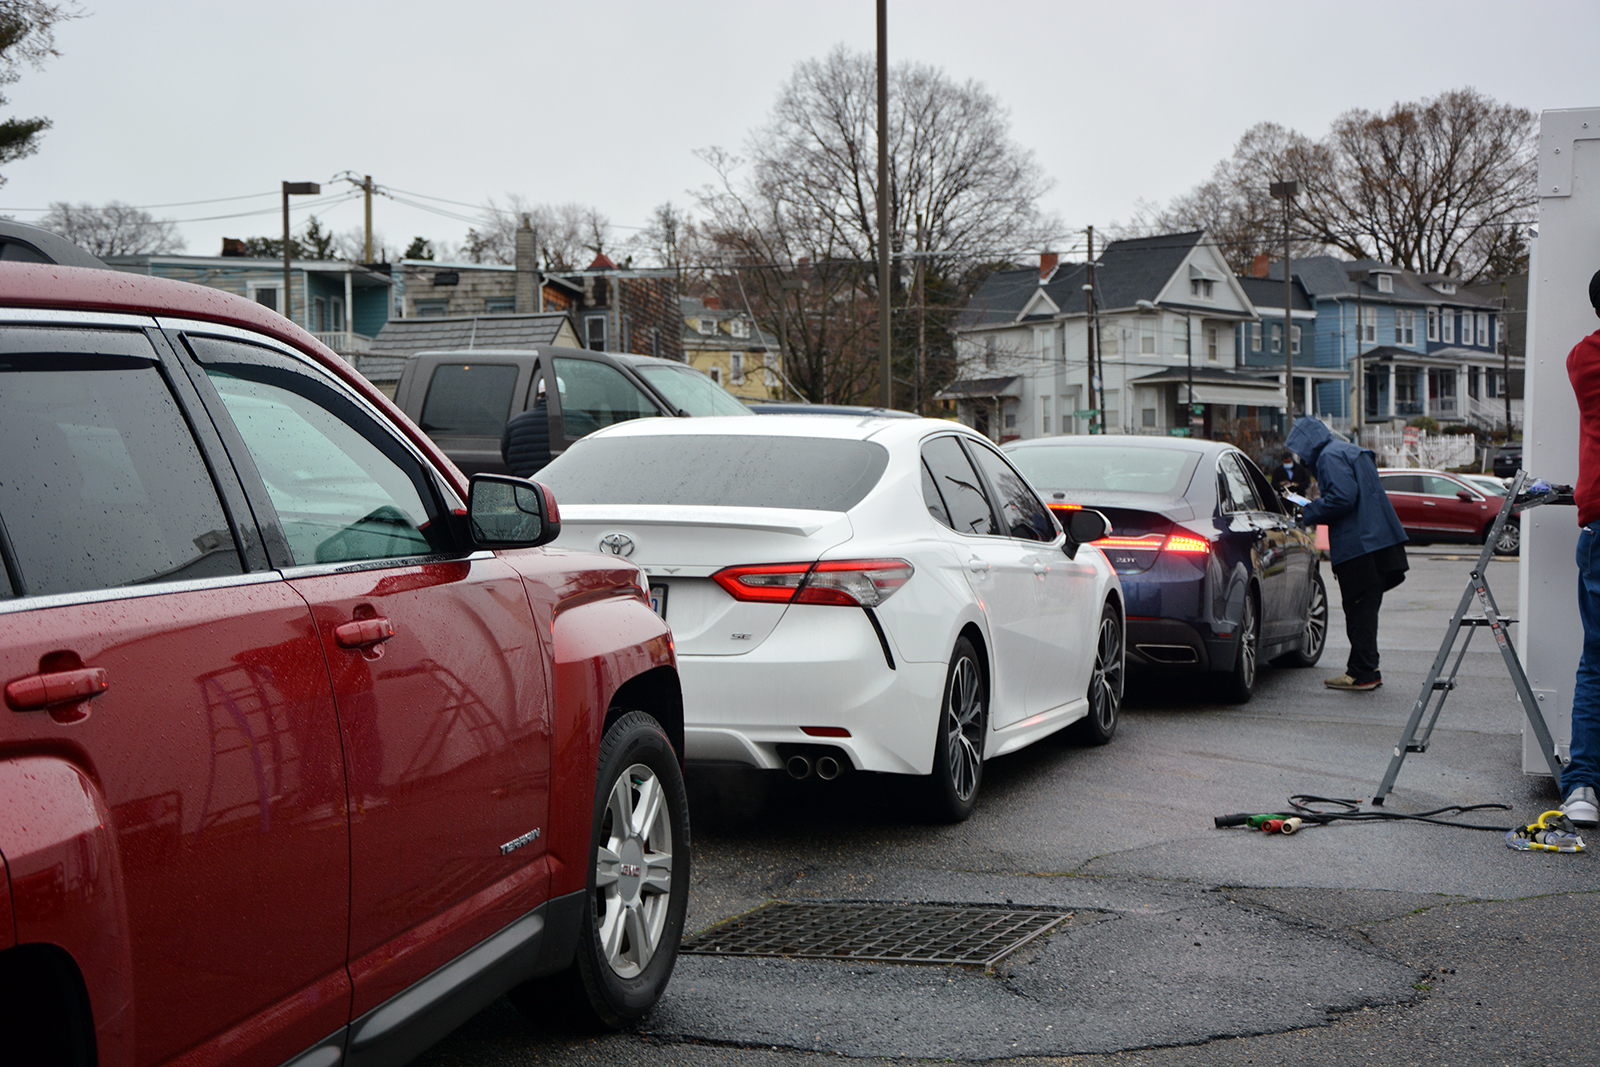 People wait in cars outside Union Temple Baptist Church before going in to receive the Moderna COVID-19 vaccine, Thursday, March 18, 2021, in Washington. RNS photo by Jack Jenkins